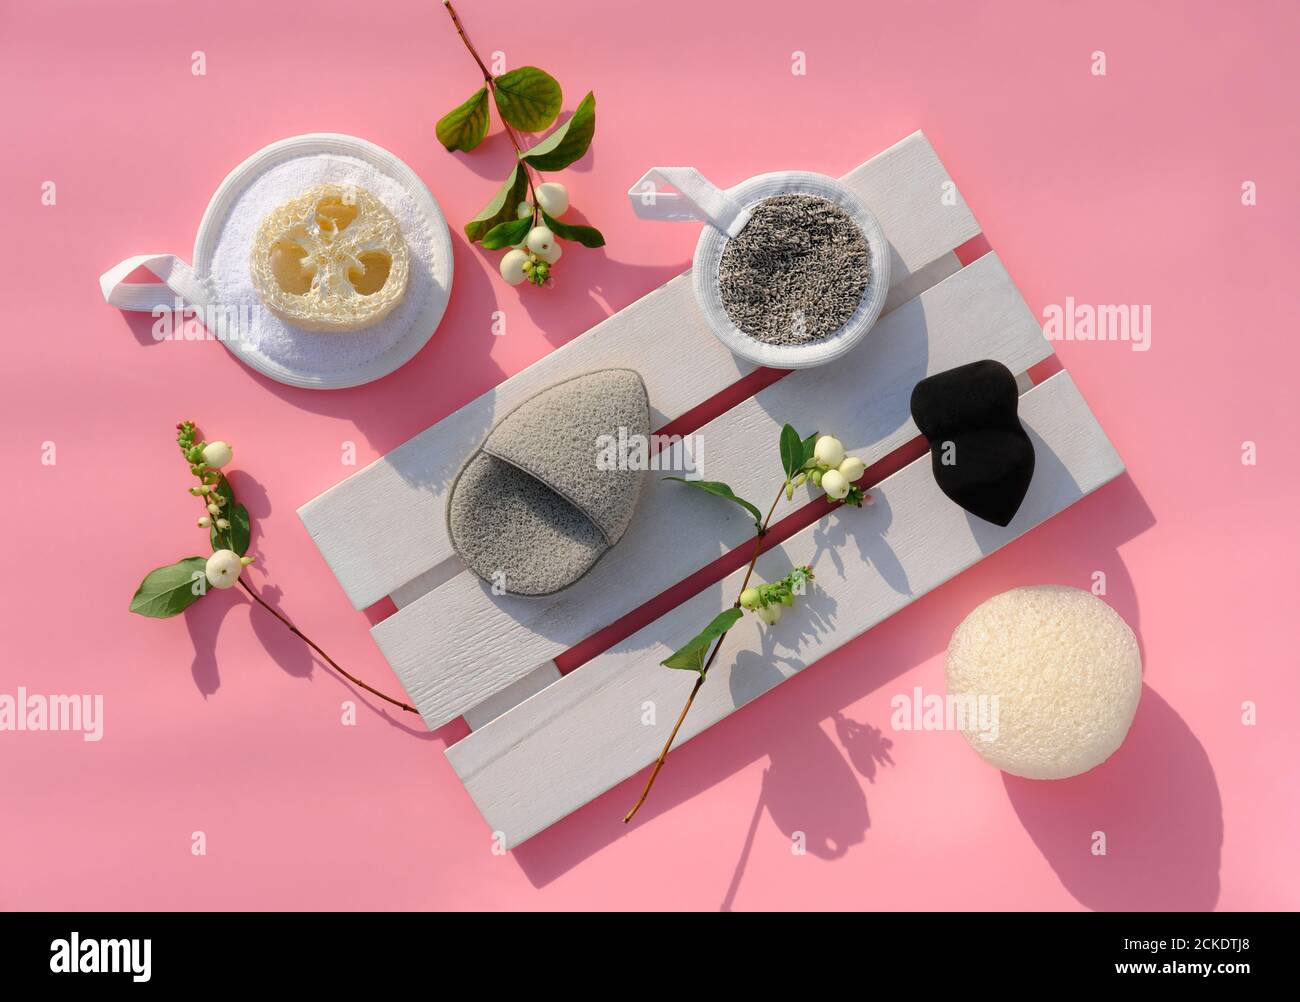 various types of face sponges for make up removing and cleaning face. konjak and loofah or luffa sponge, reusable cleaning pads and flowers on trendy pink background.face cleaning concept. Stock Photo